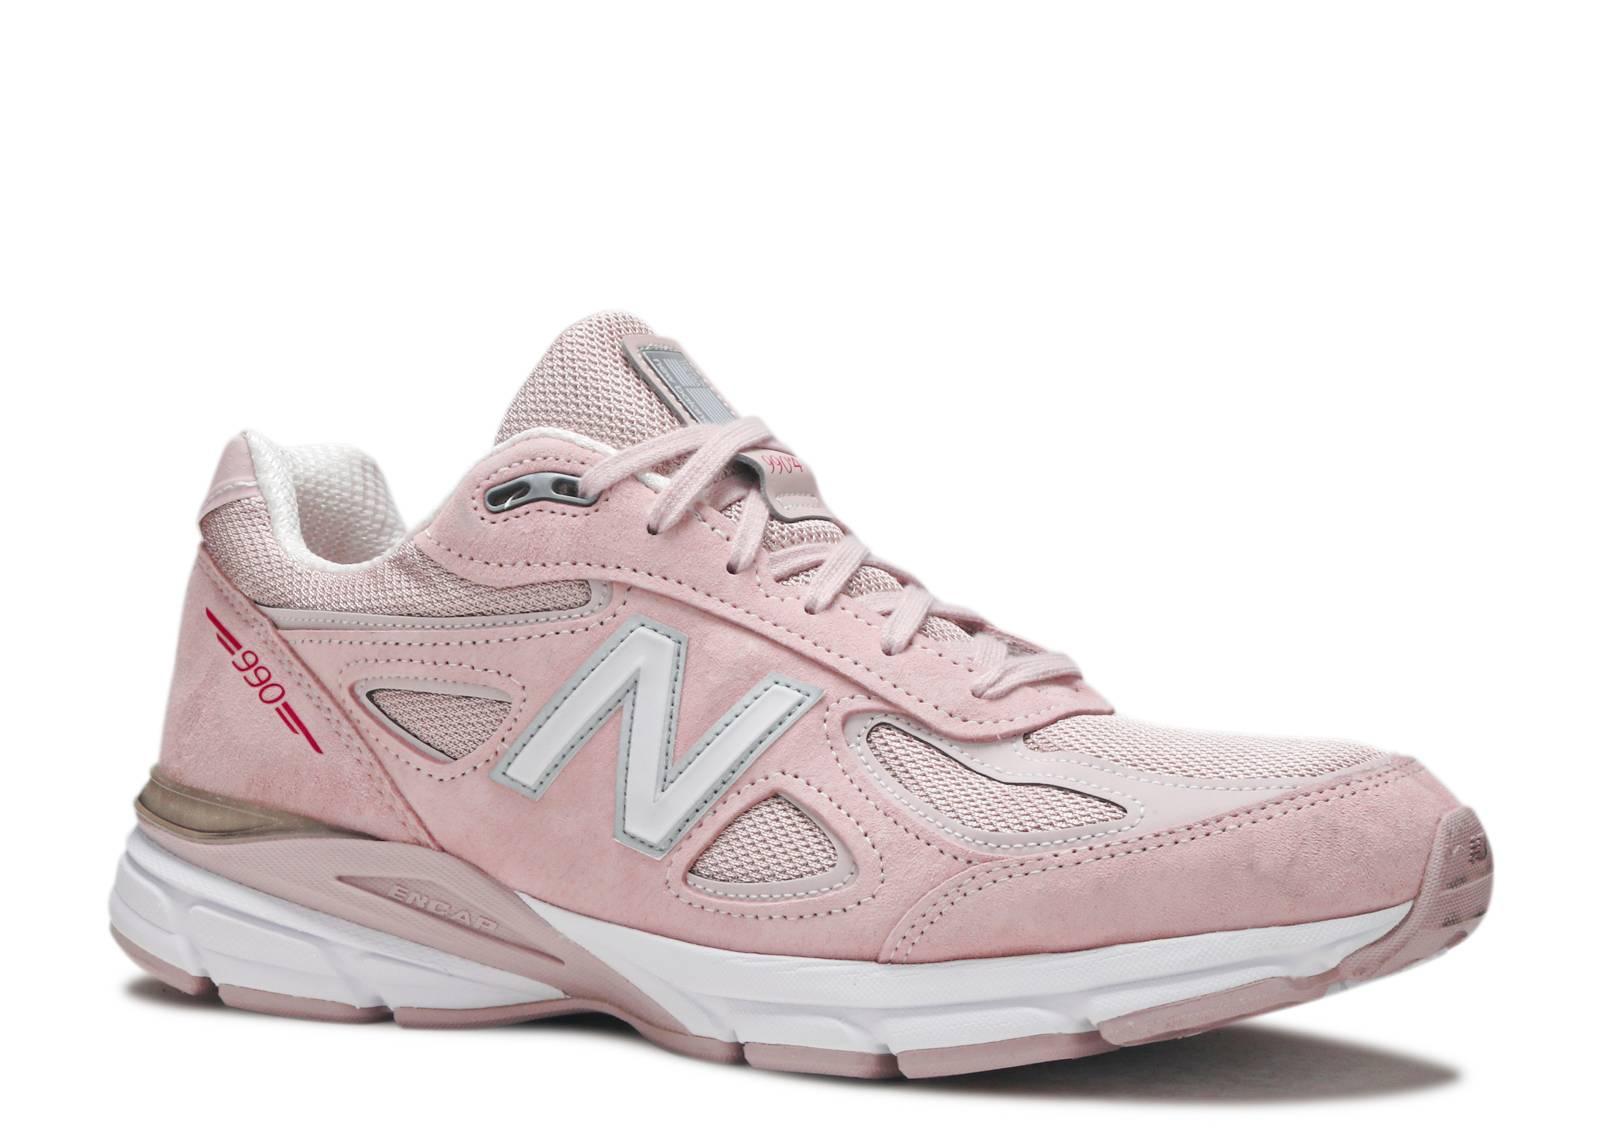 New Balance Made 990 V4 Sneaker in Pink 